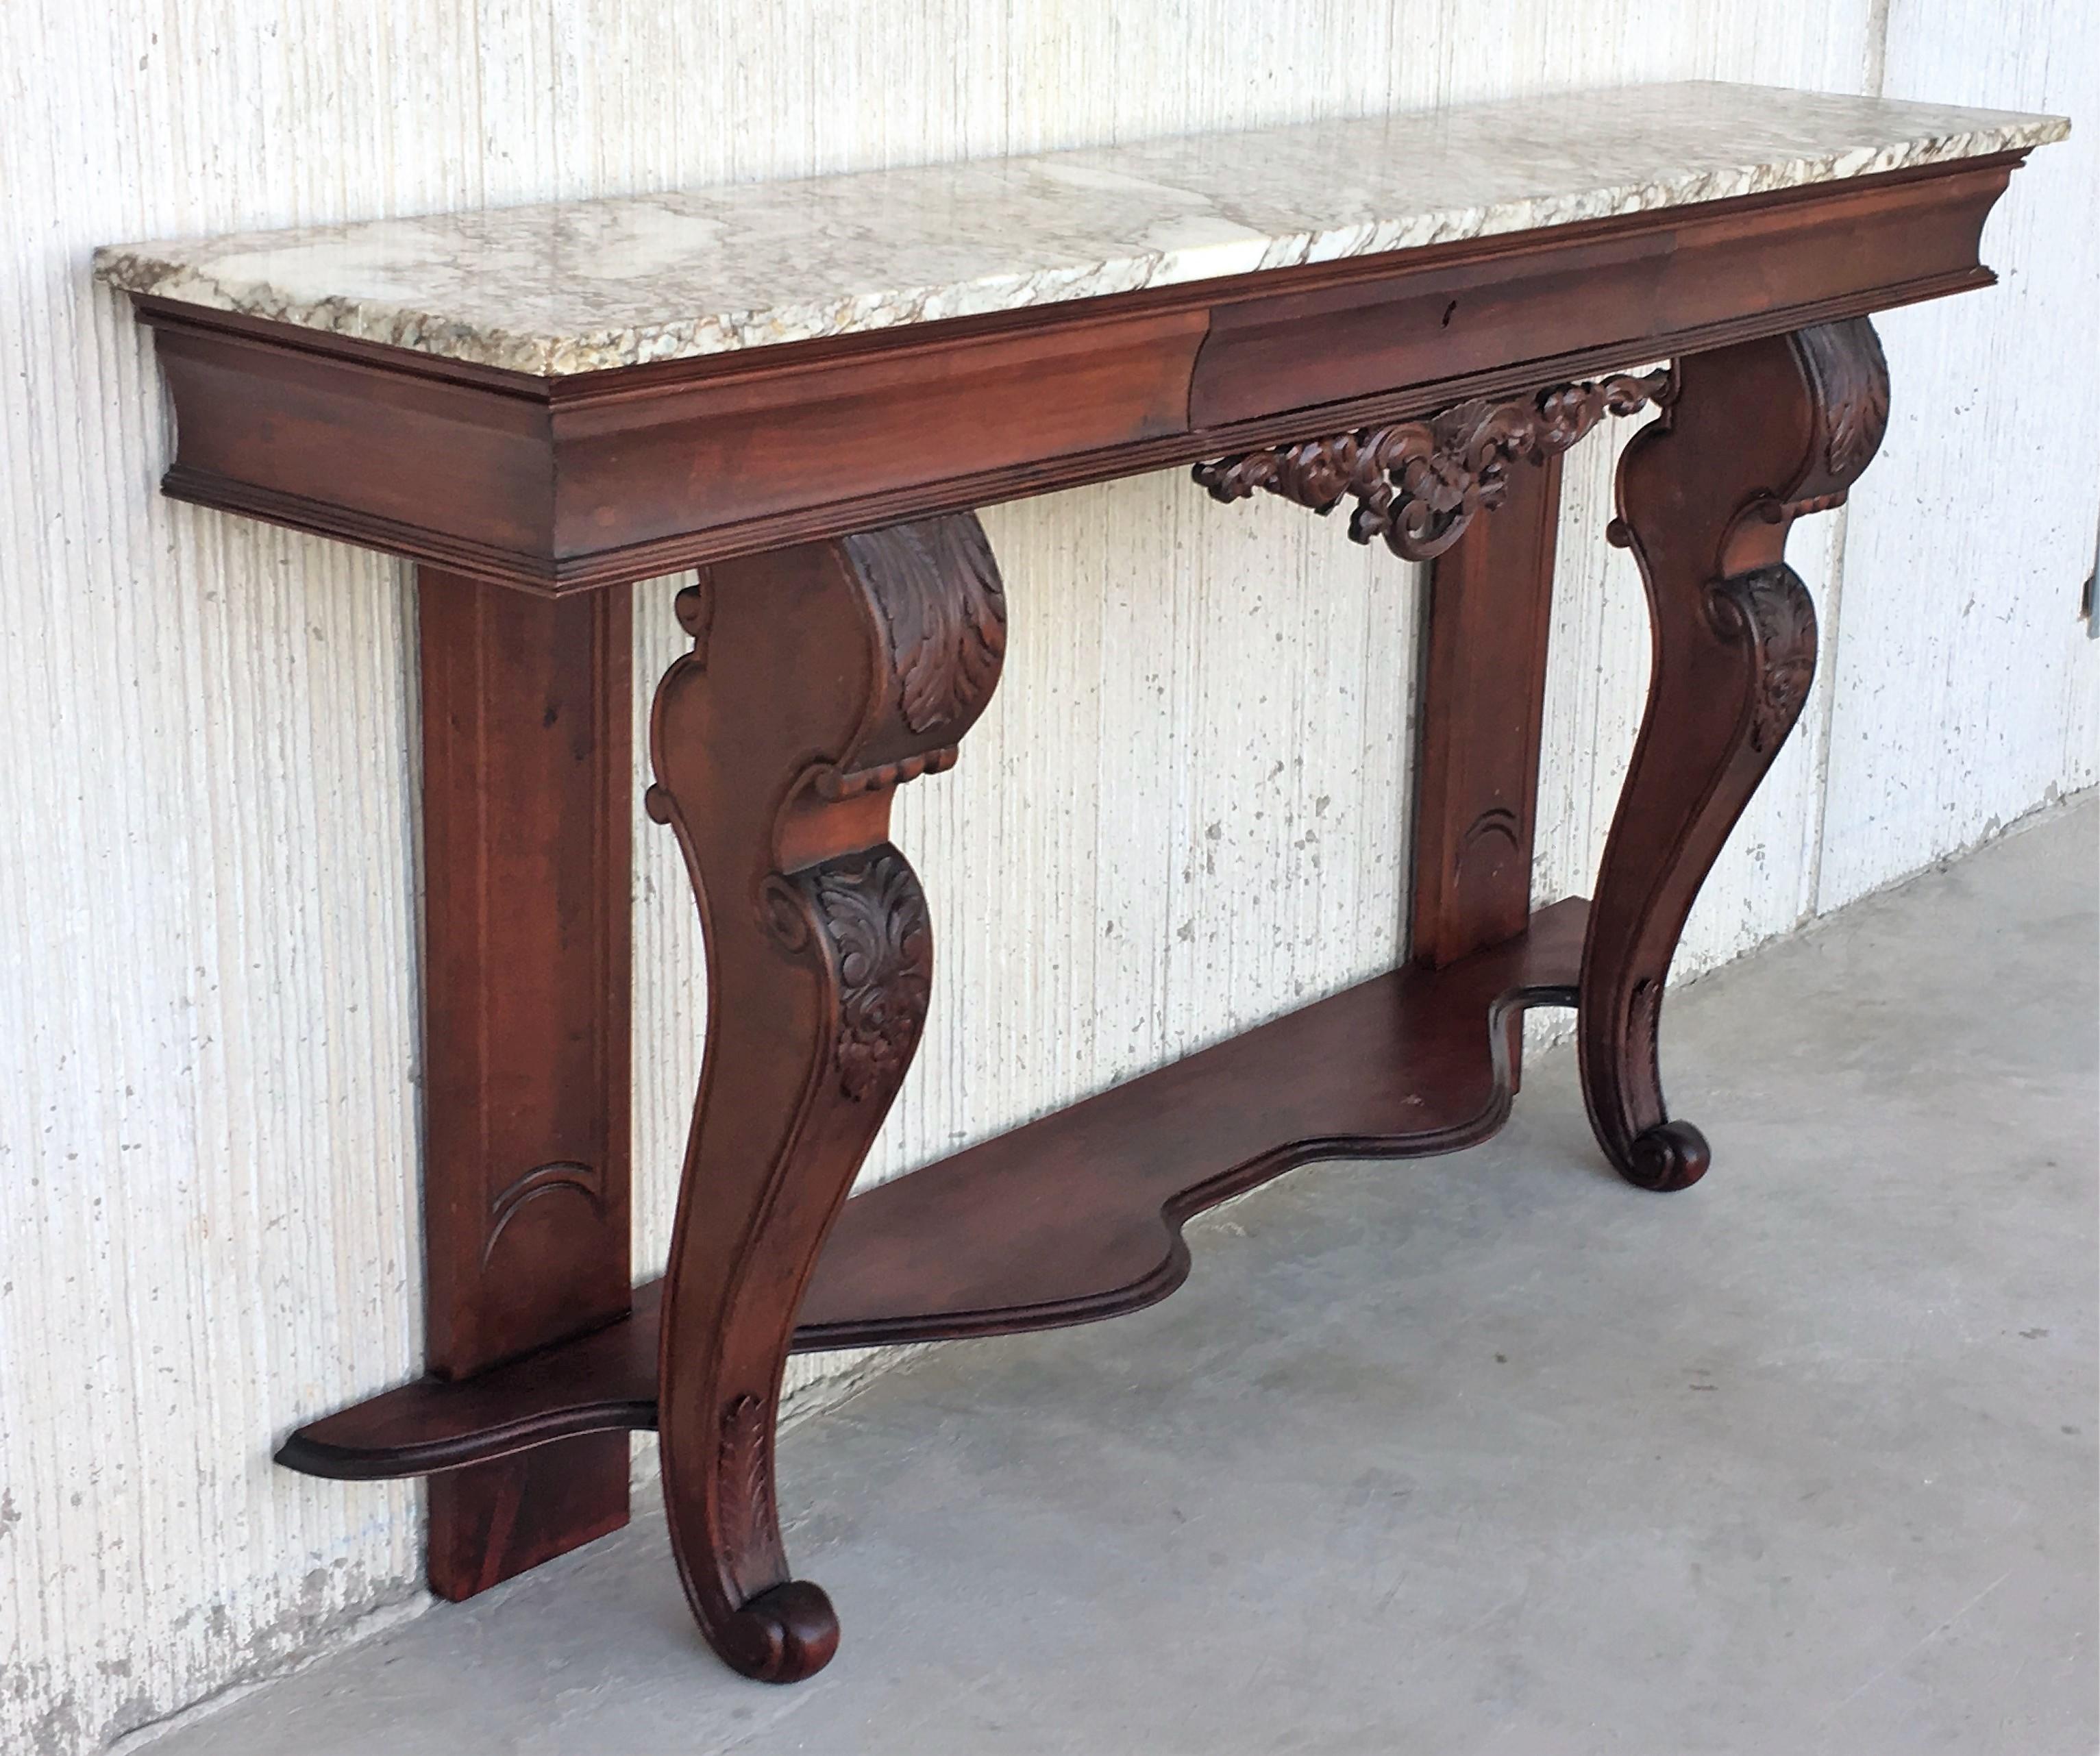 Baroque Revival 19th Century Carved Mahogany Console with Marble Top and Central Drawer